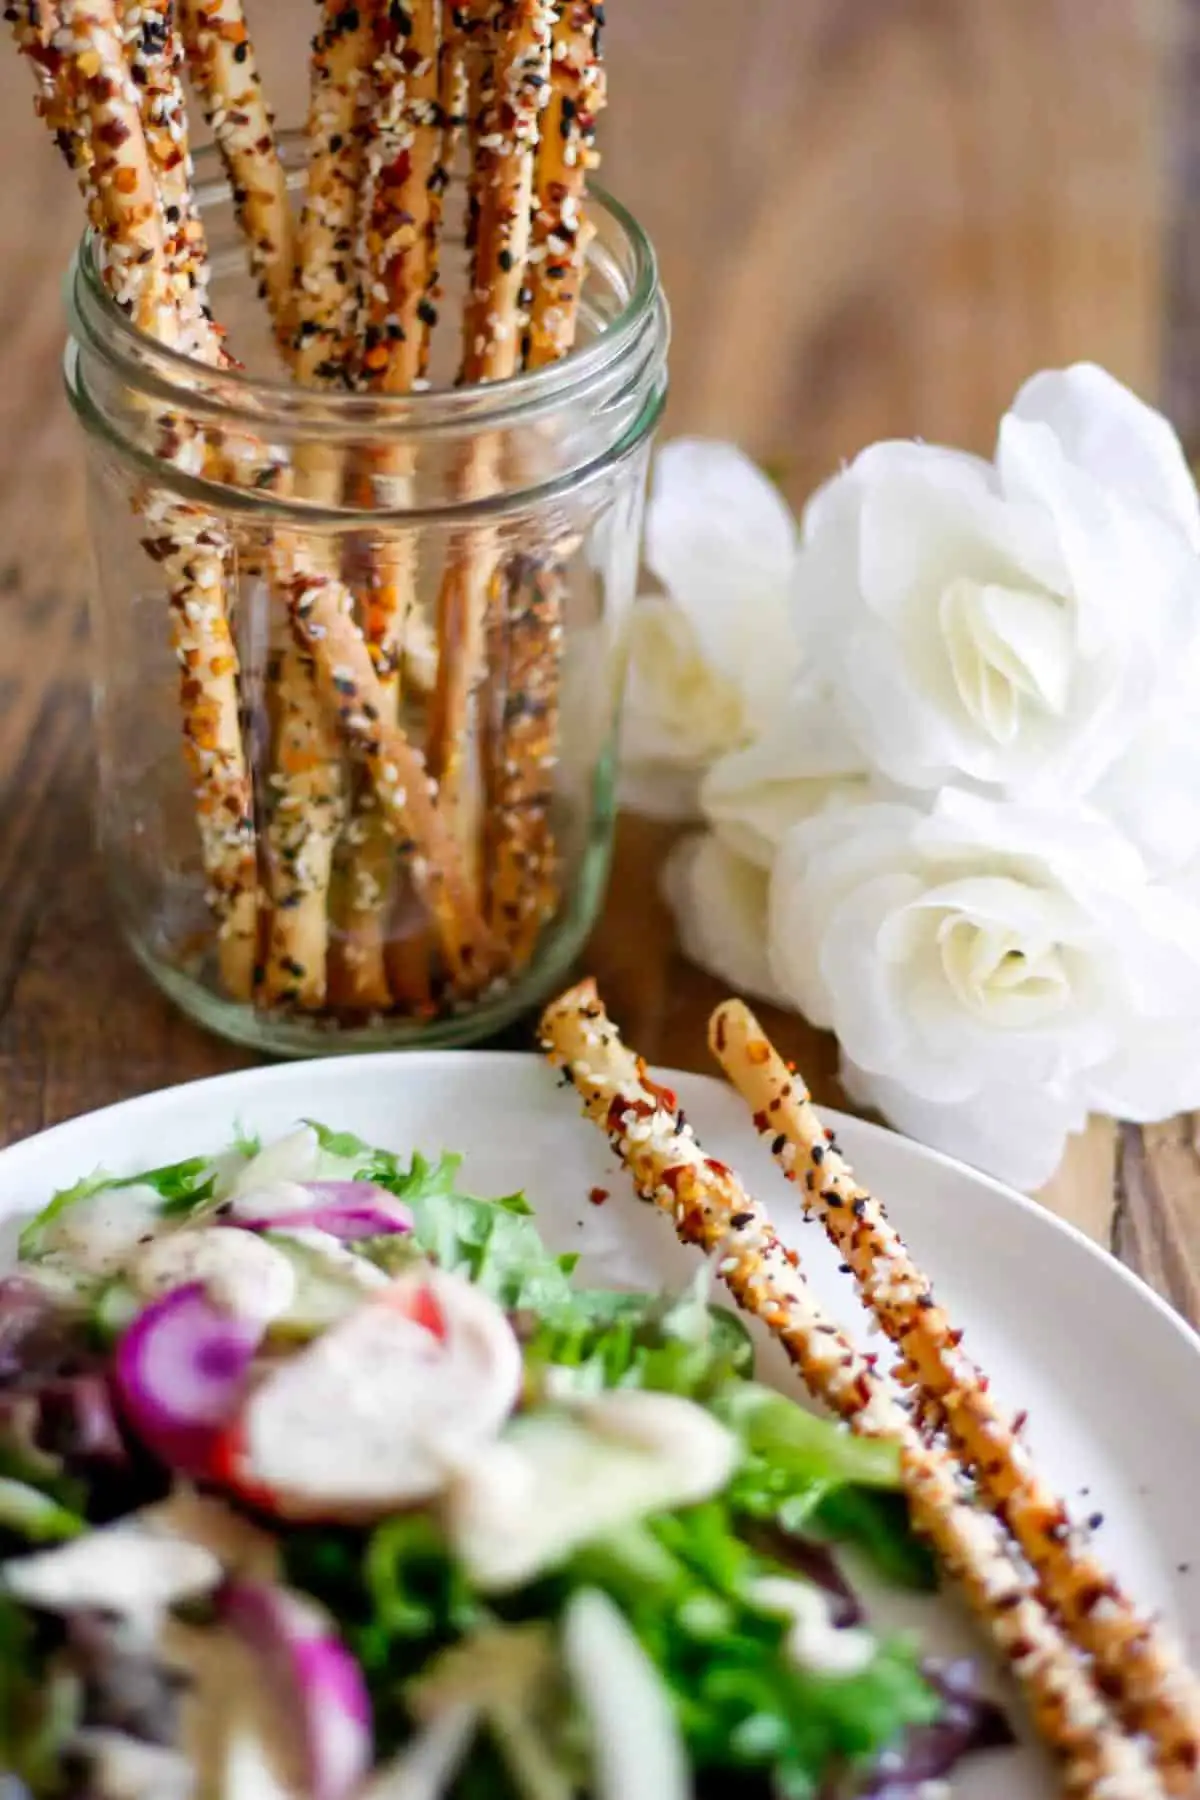 Everything Bagel breadsticks in a glass jar next to some white flowers. There is a white plate with salad and a couple of the breadsticks next to the salad.